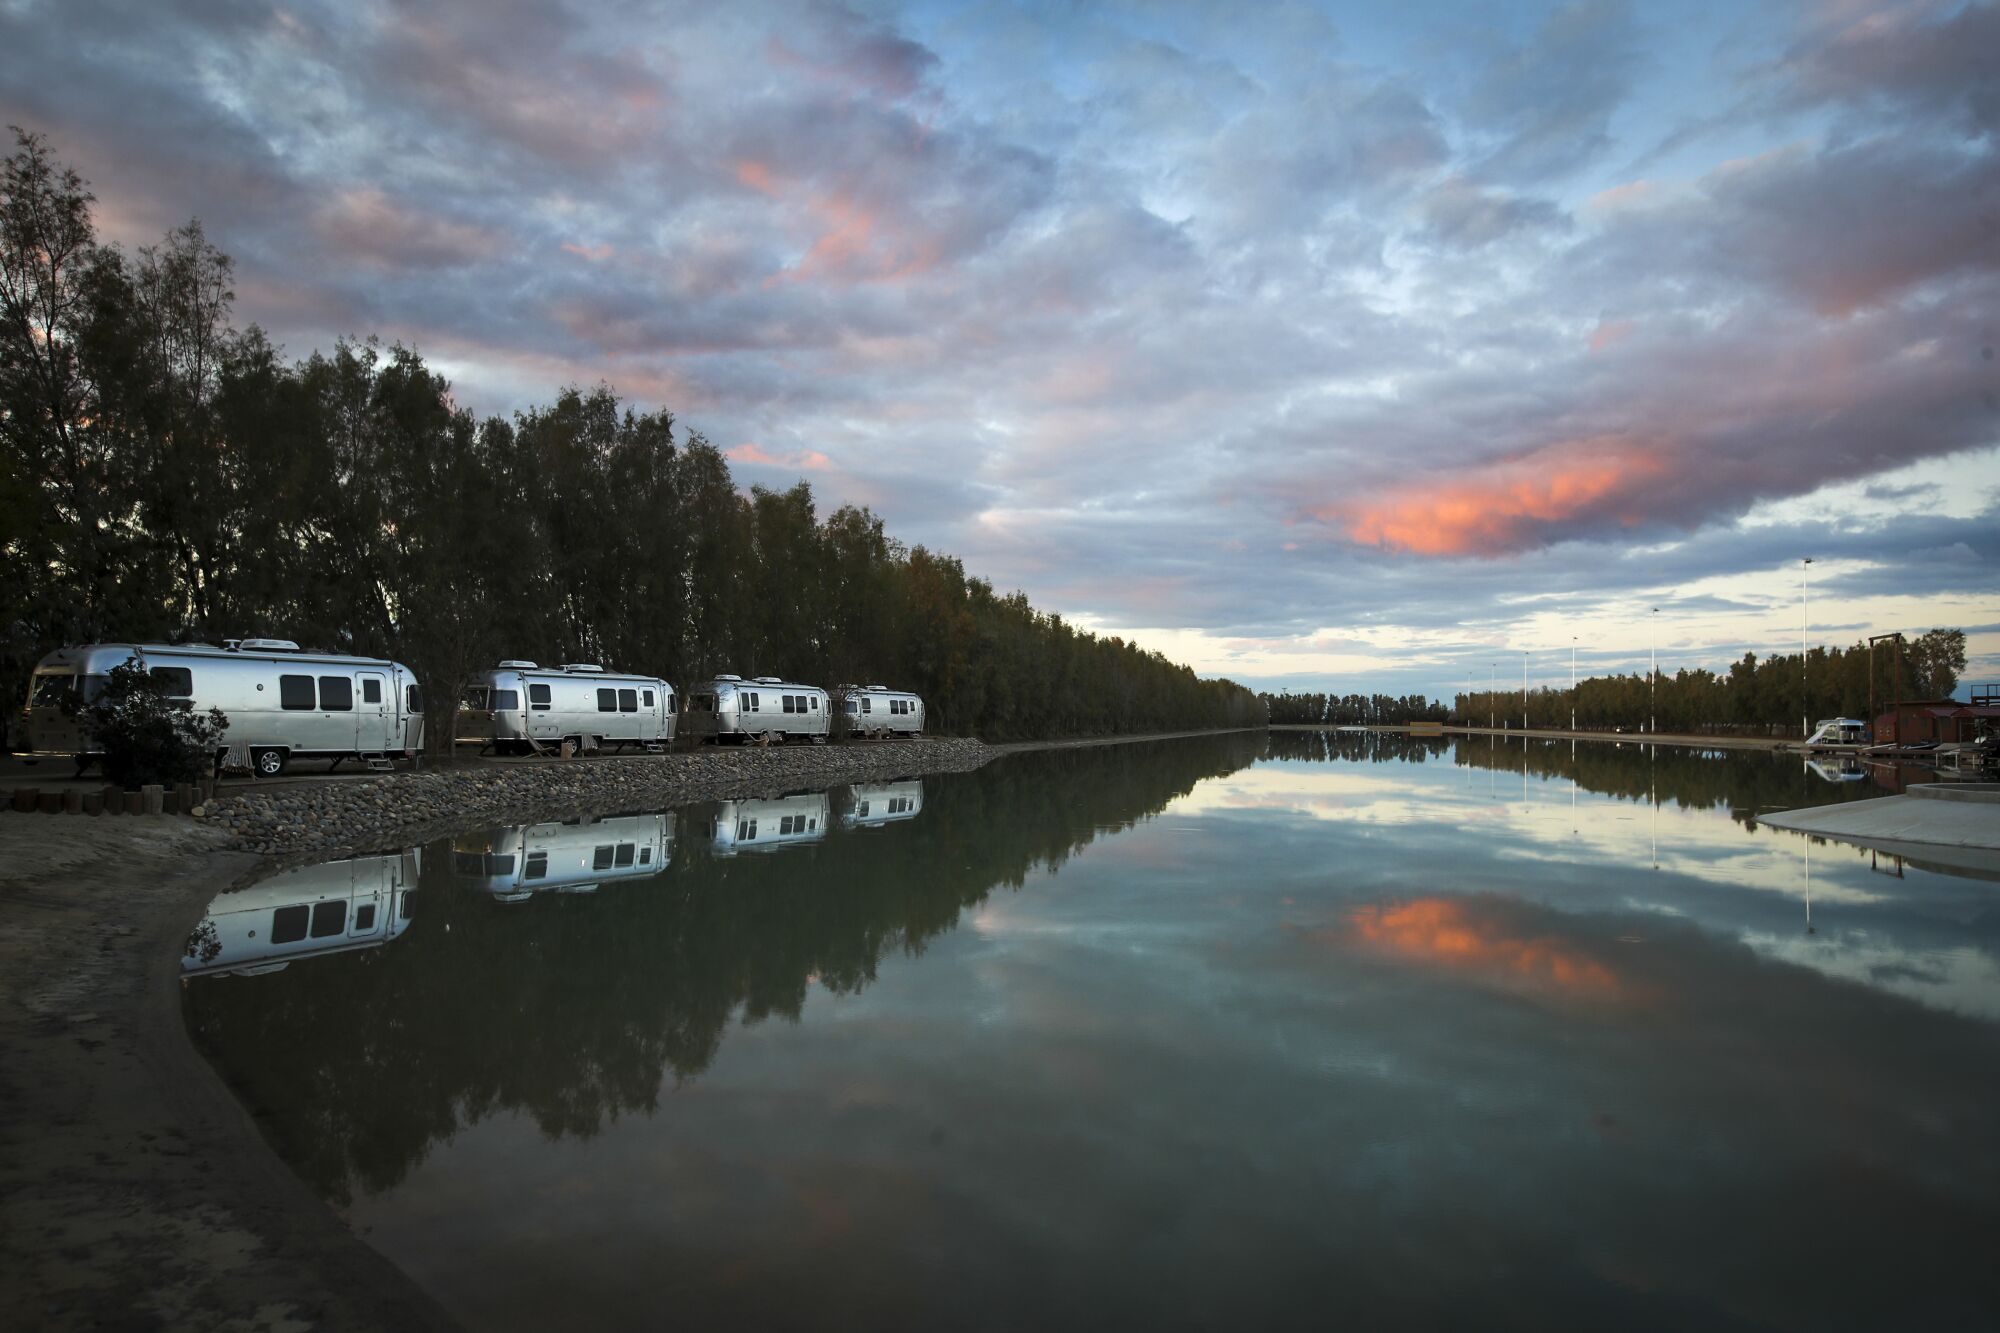 The sun sets over Airstream campers overlooking a lake next to the wave pool